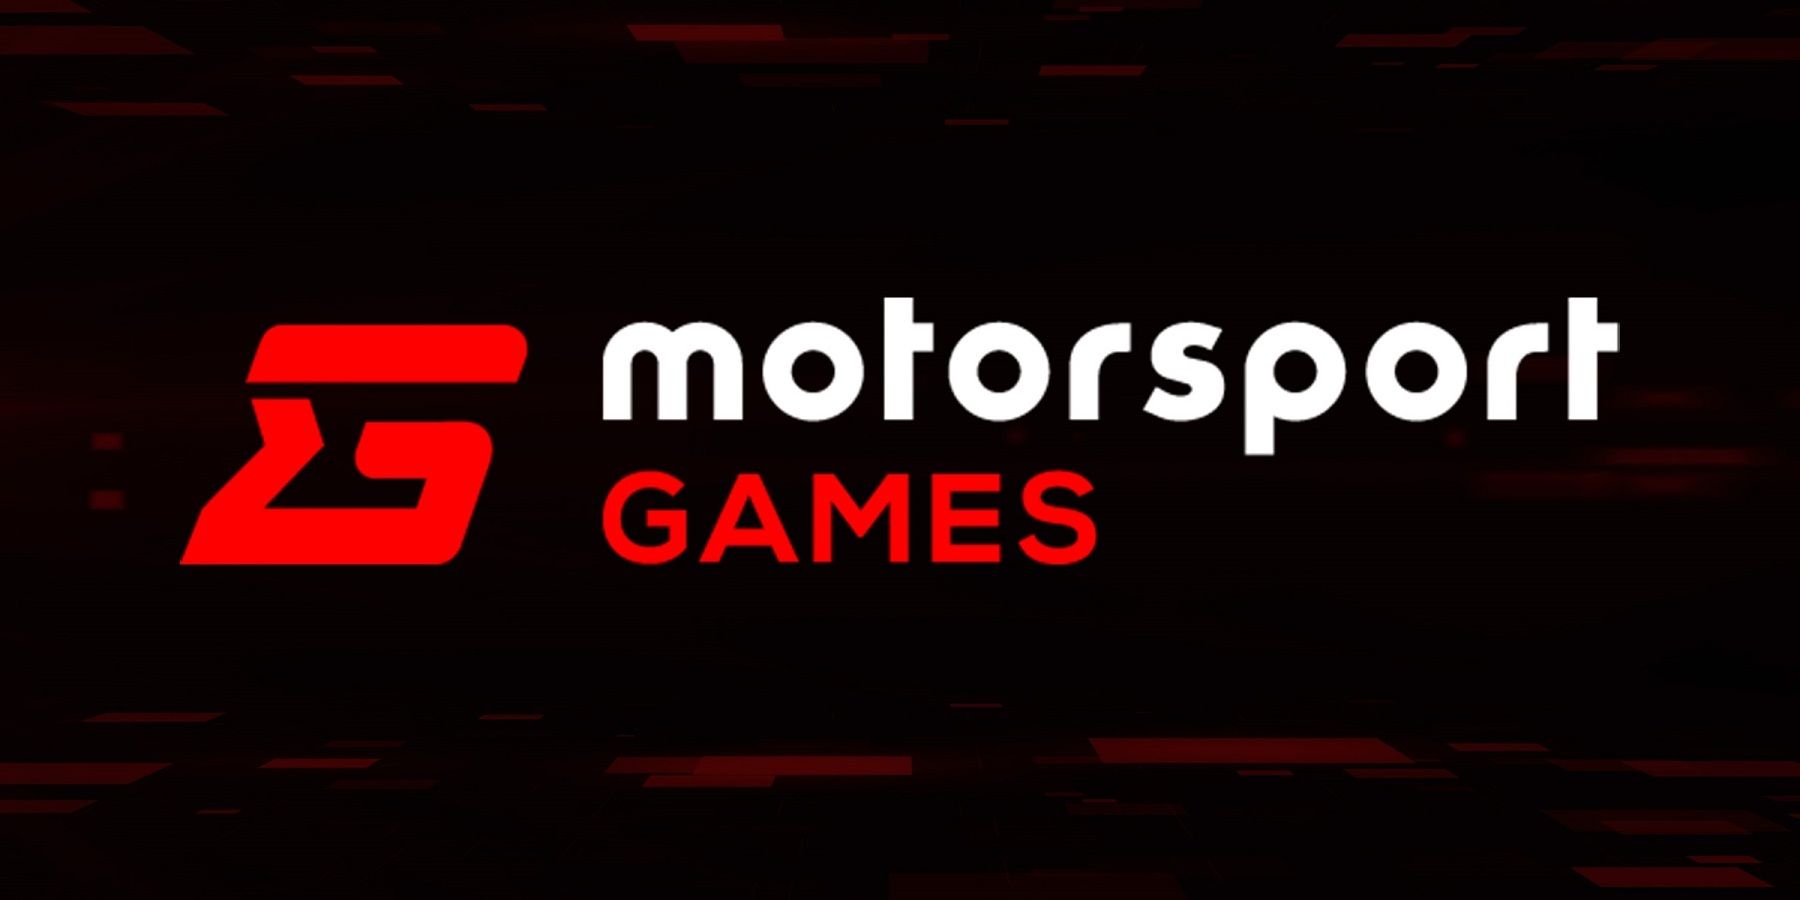 Motorsport-Games-Official-Company-Logo-Simple